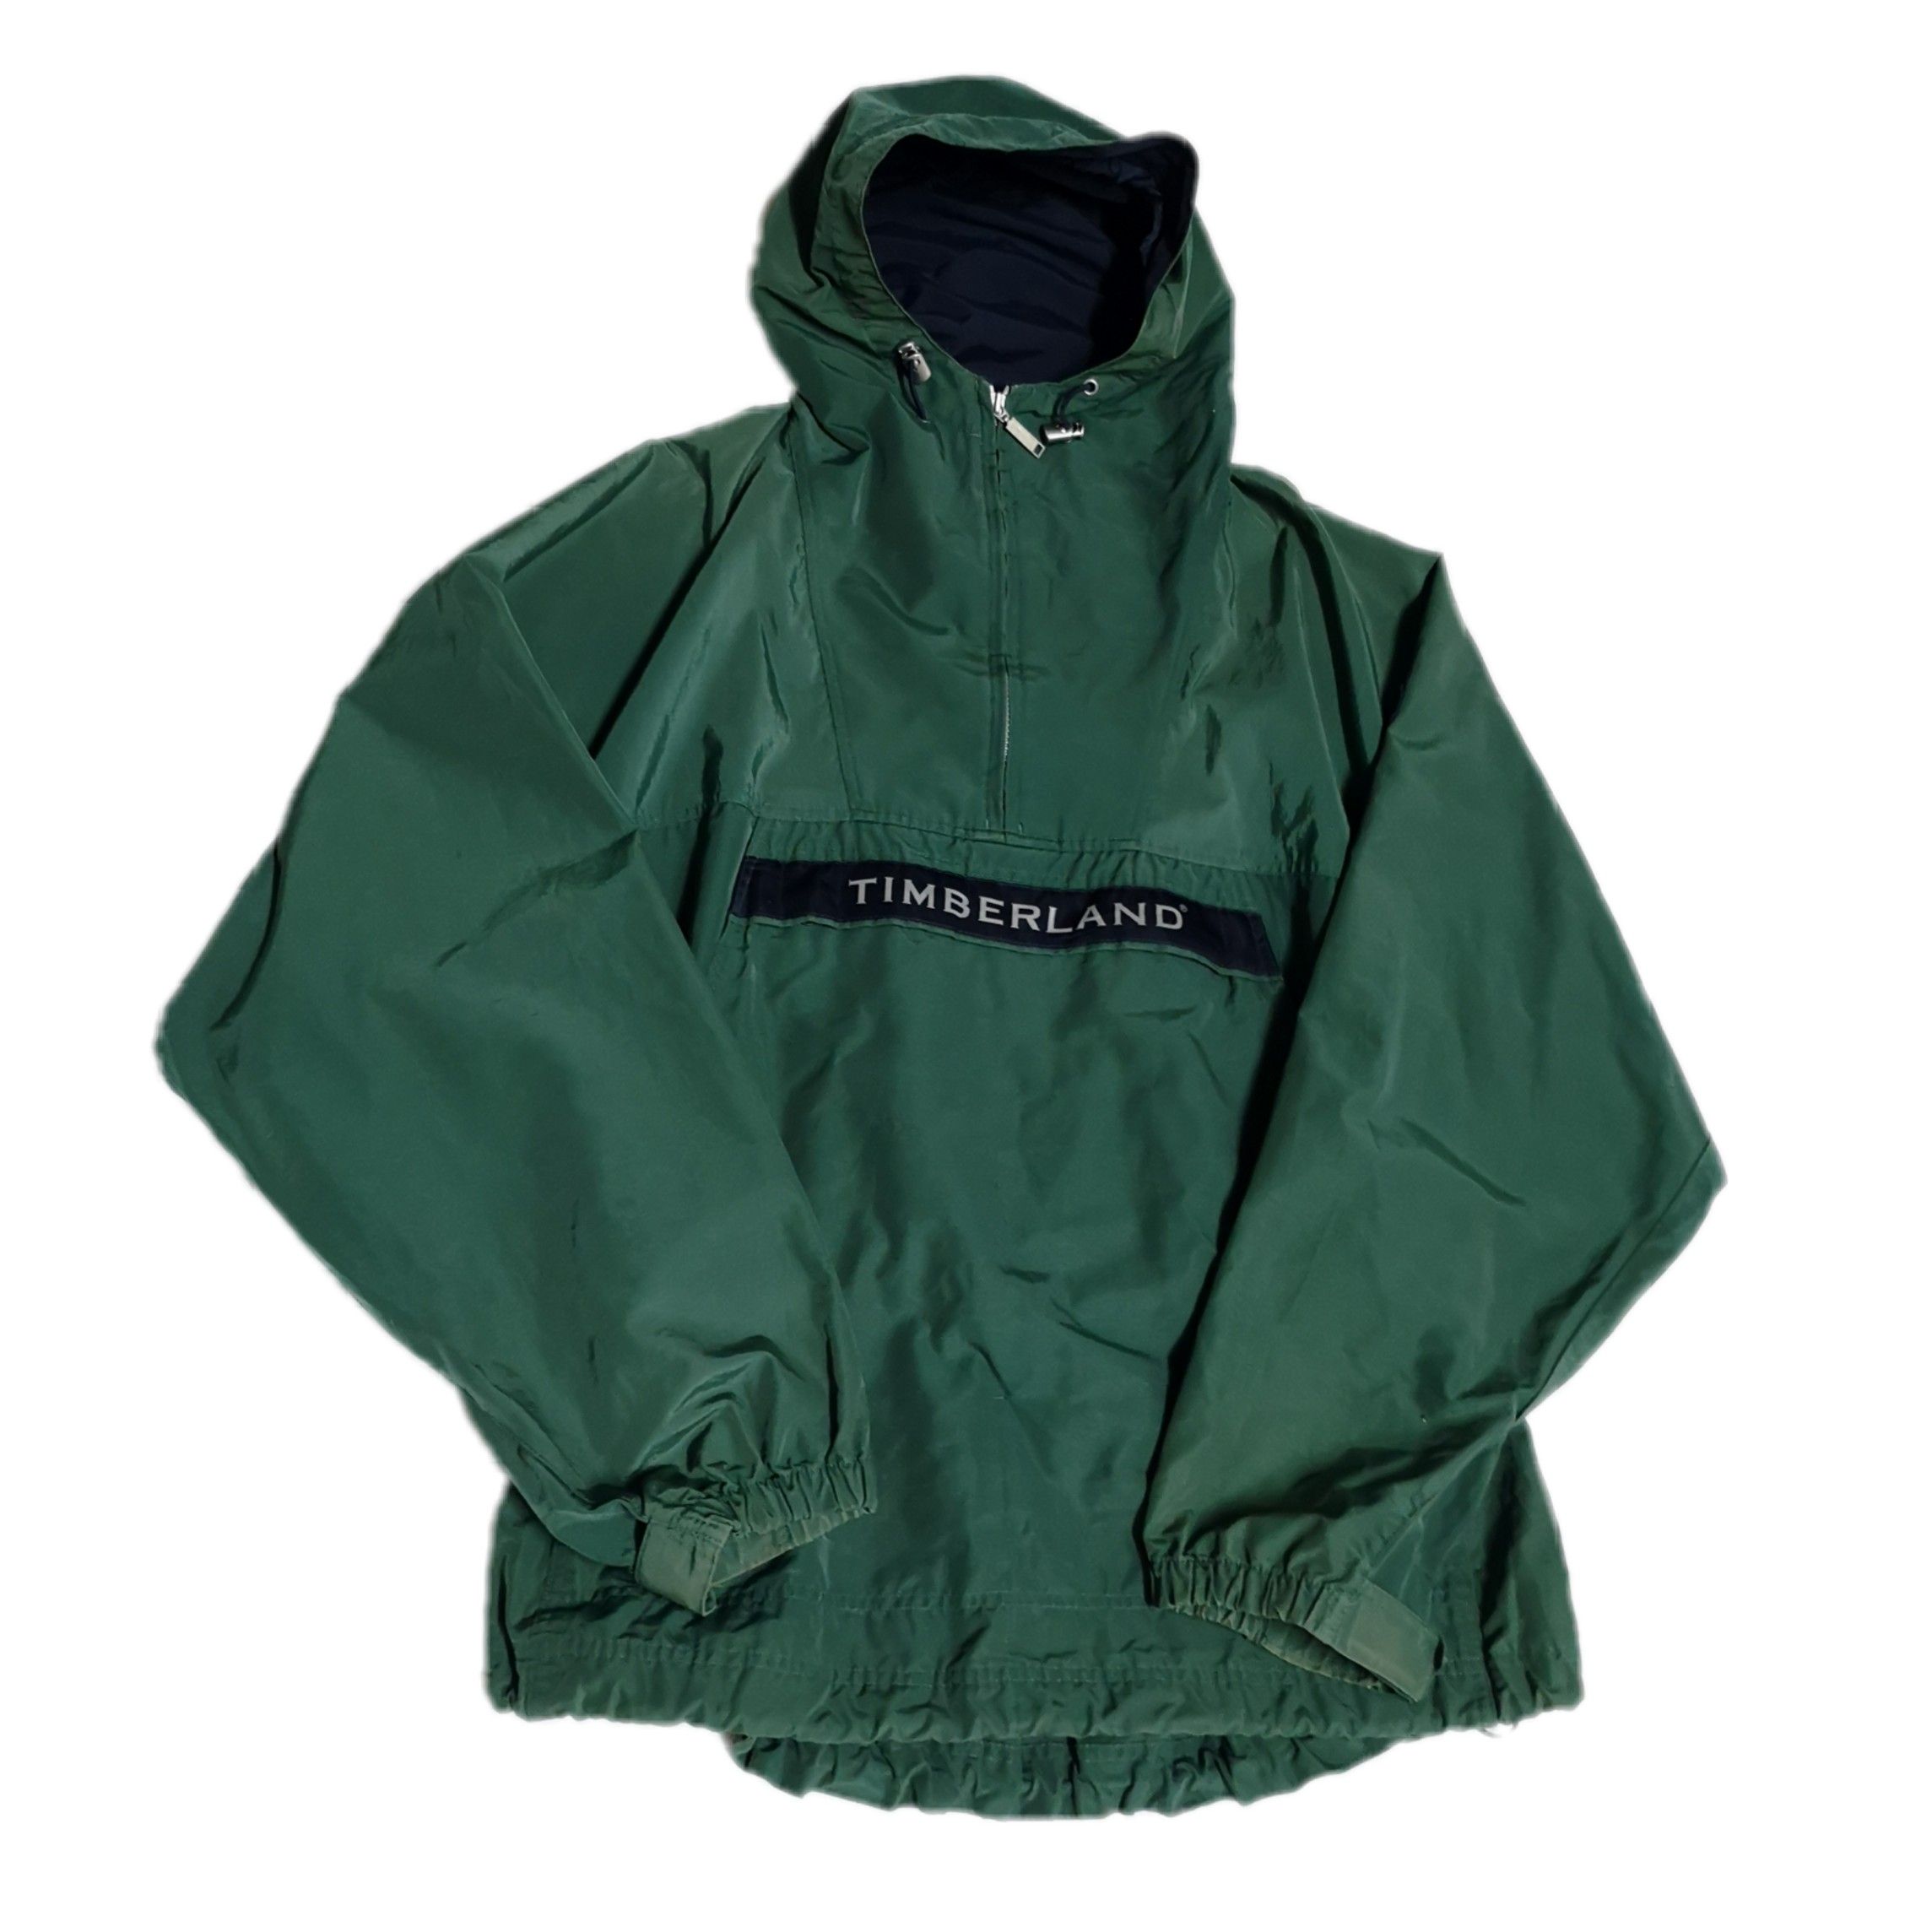 Pre-owned Timberland Hoddies Authentic Weathergear In Green/black